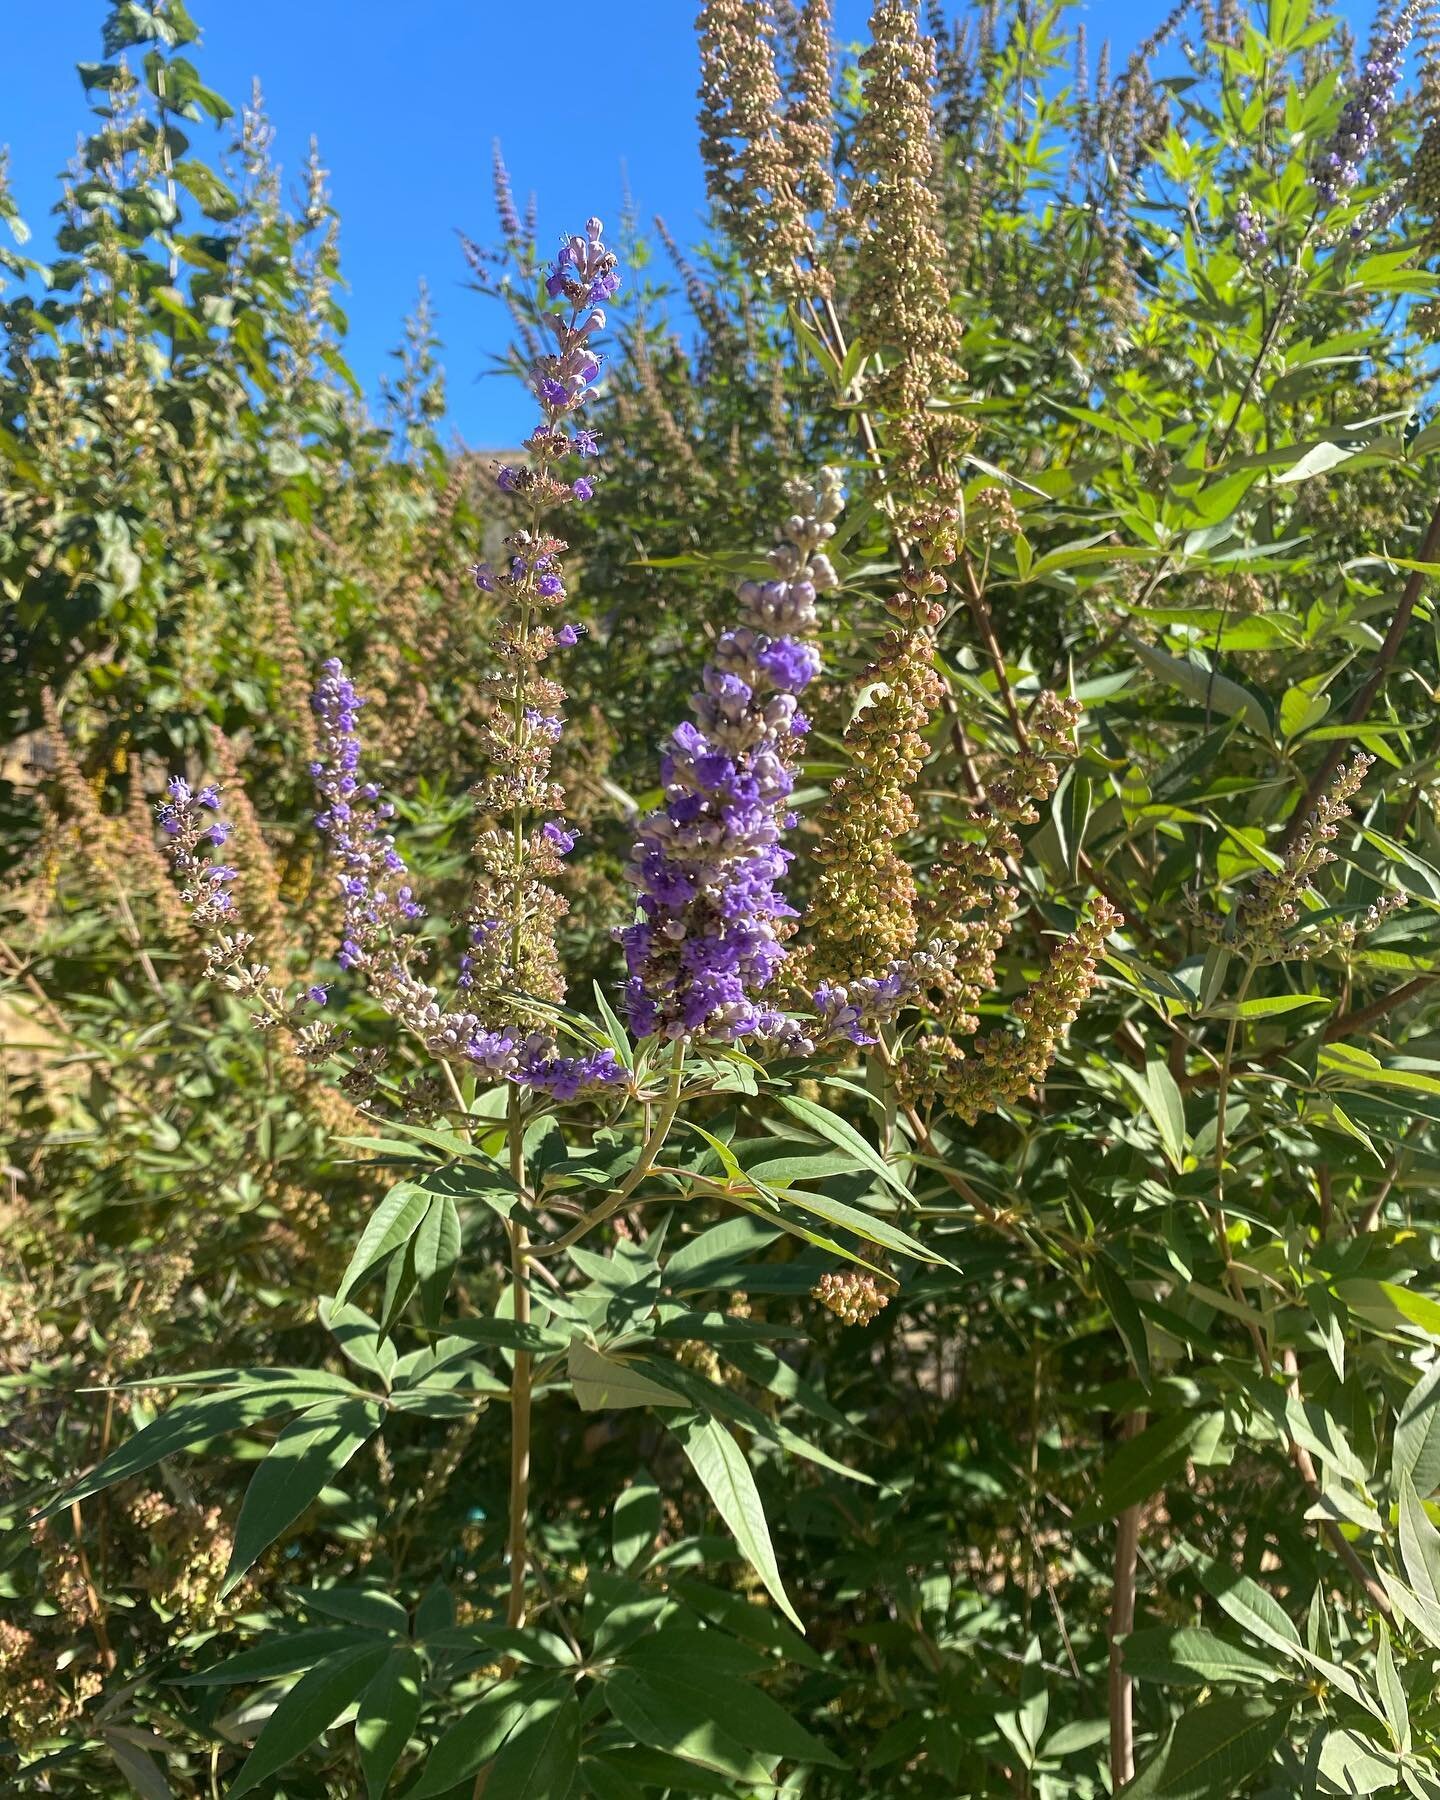 Chaste Tree (vitex agnus-castus)
A hormone modulator &amp; regulator that enhances communication between the hypothalamus-pituitary-ovarian system. 

Especially useful for those with estrogen dominance since it enhances the production of progesterone